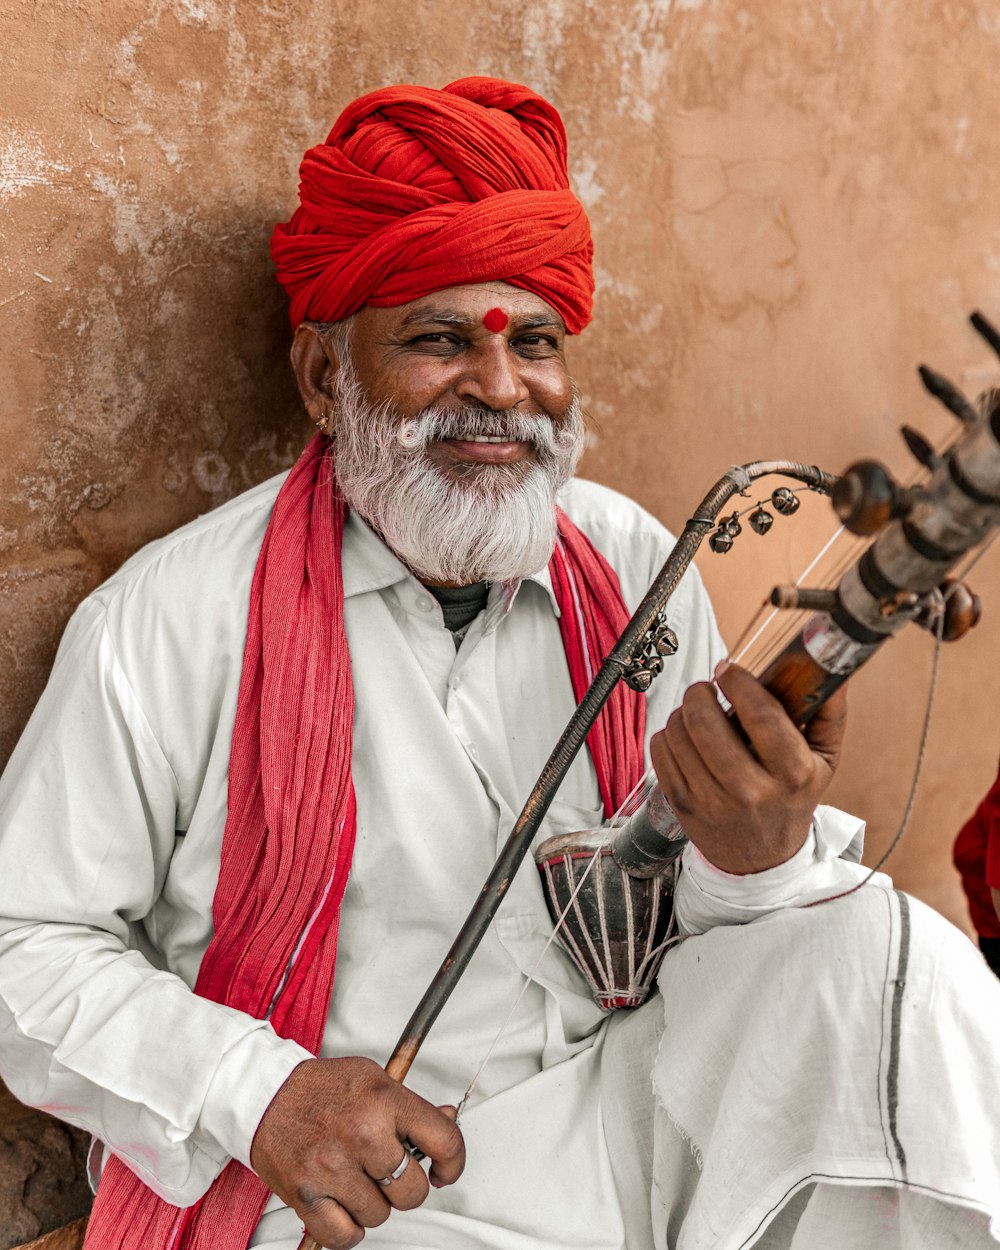 a man with a red turban playing a sitar